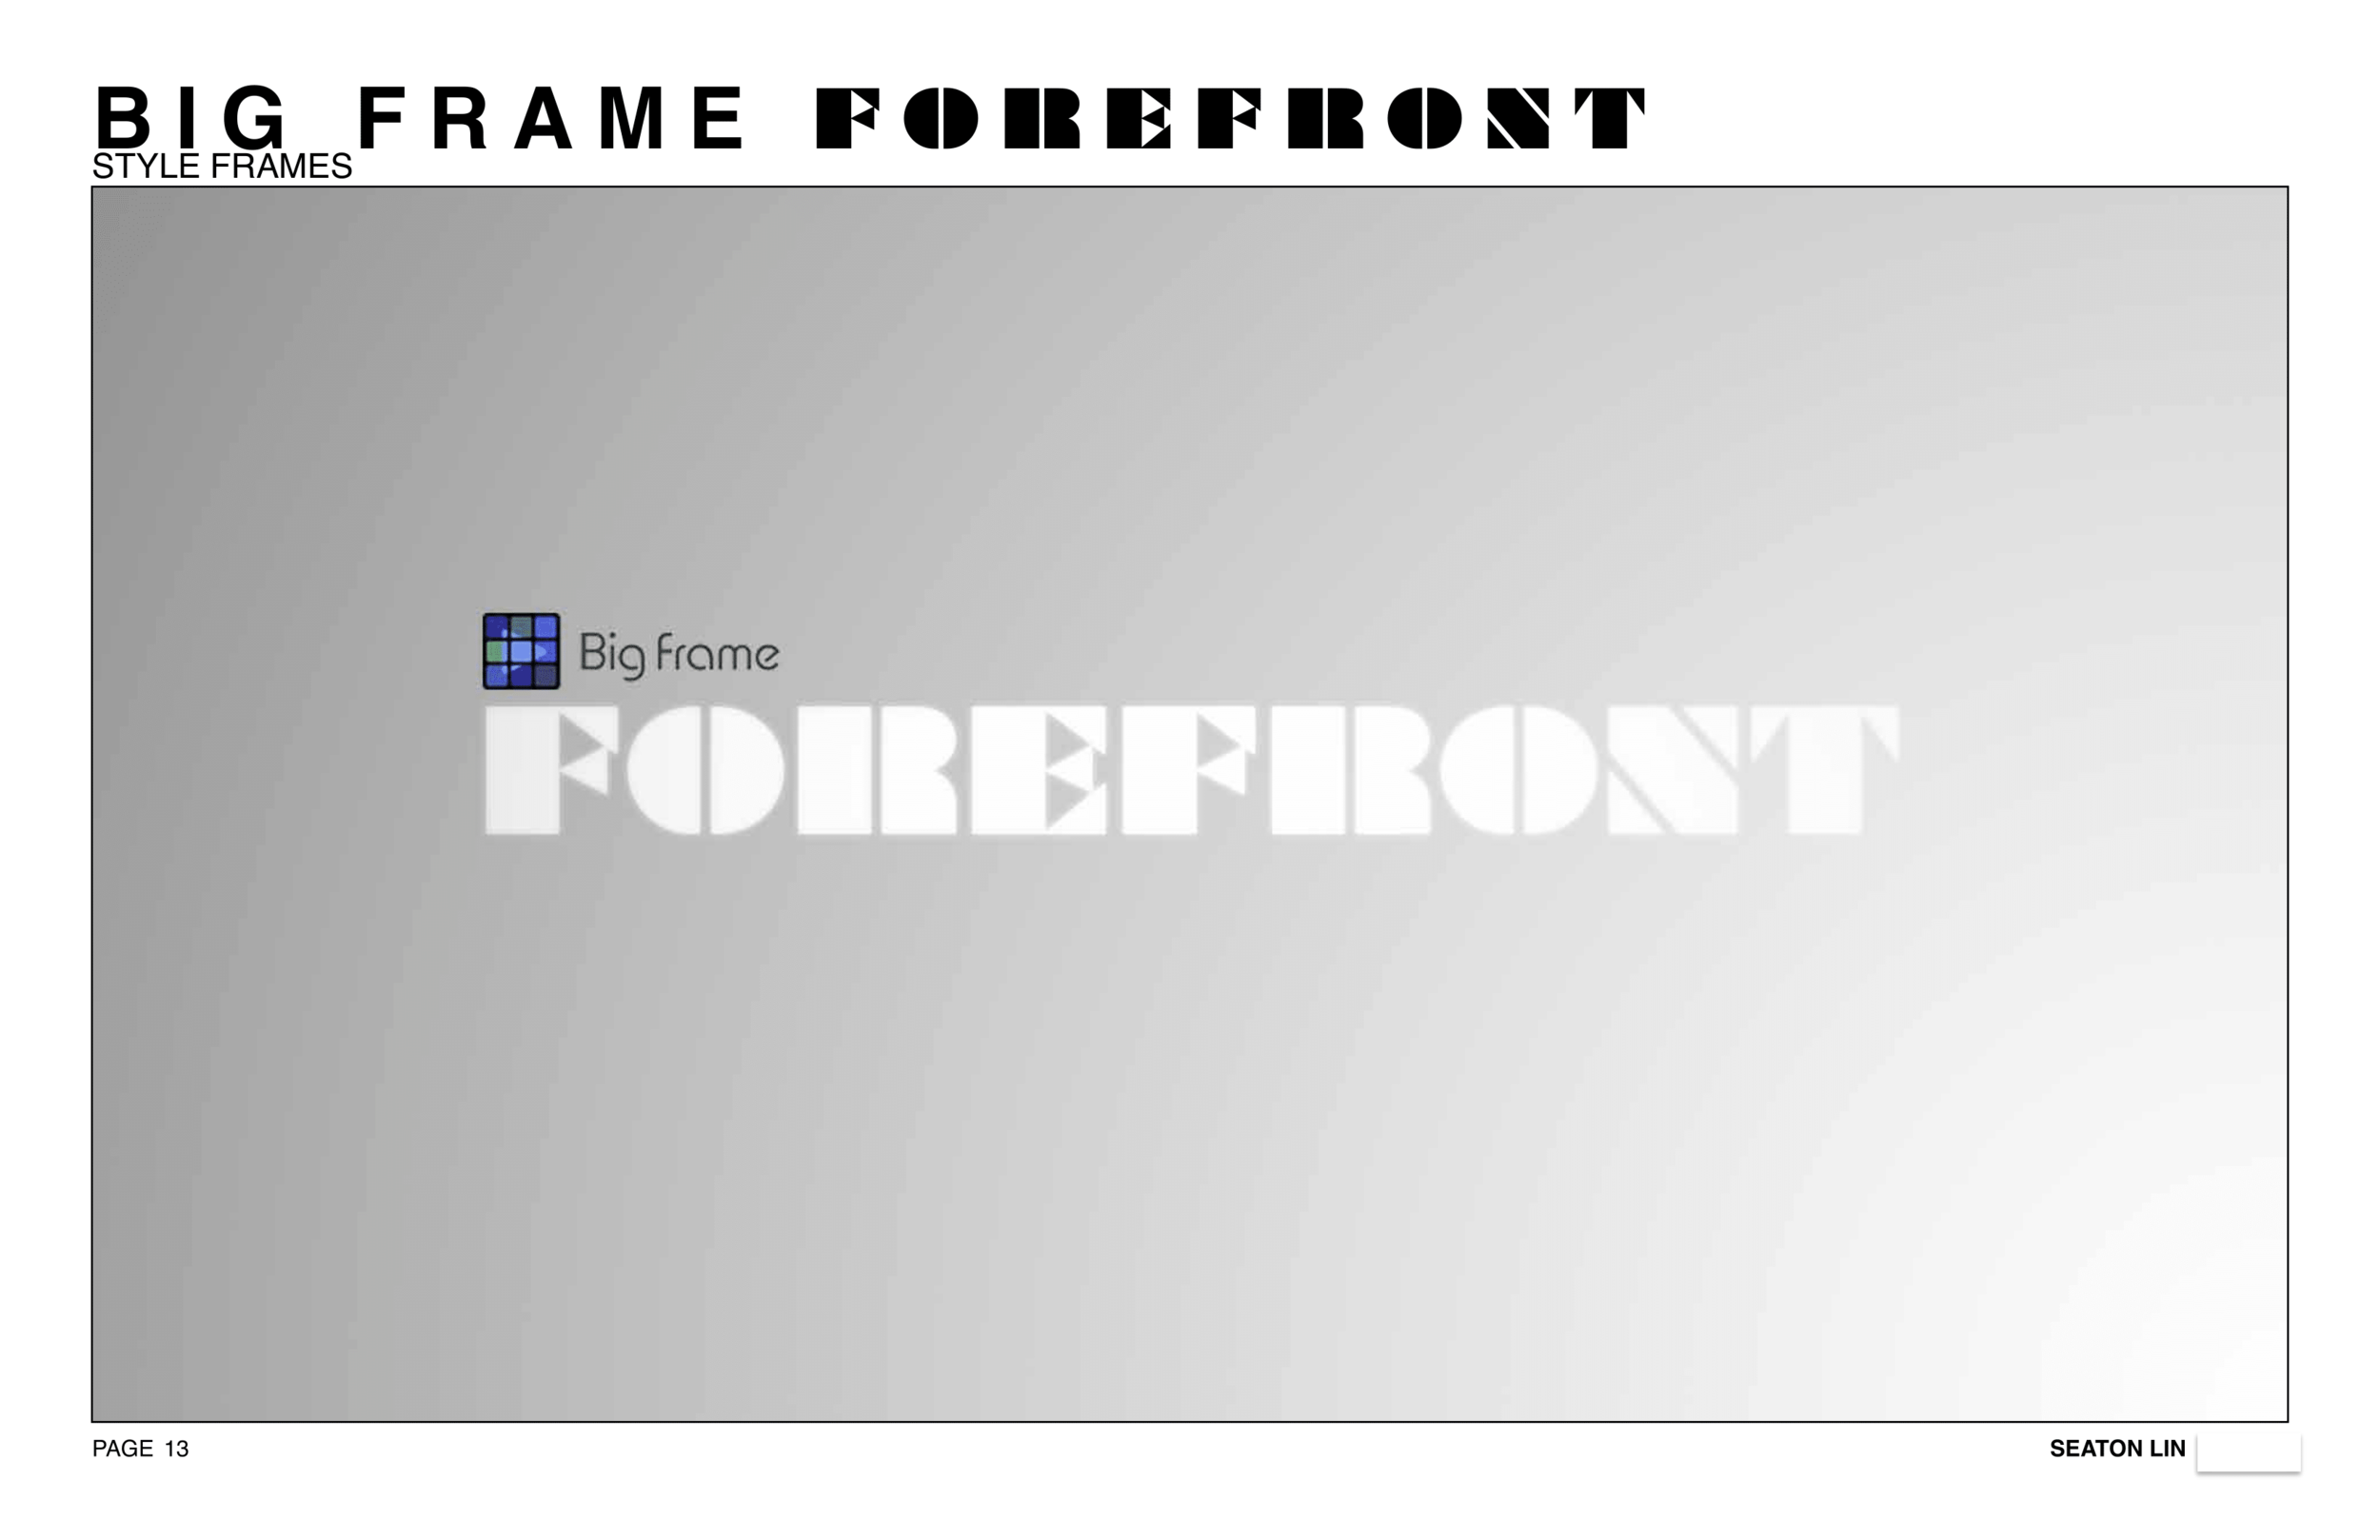 BigFrame_ForeFront_Treatment_SeatonLin-13.png